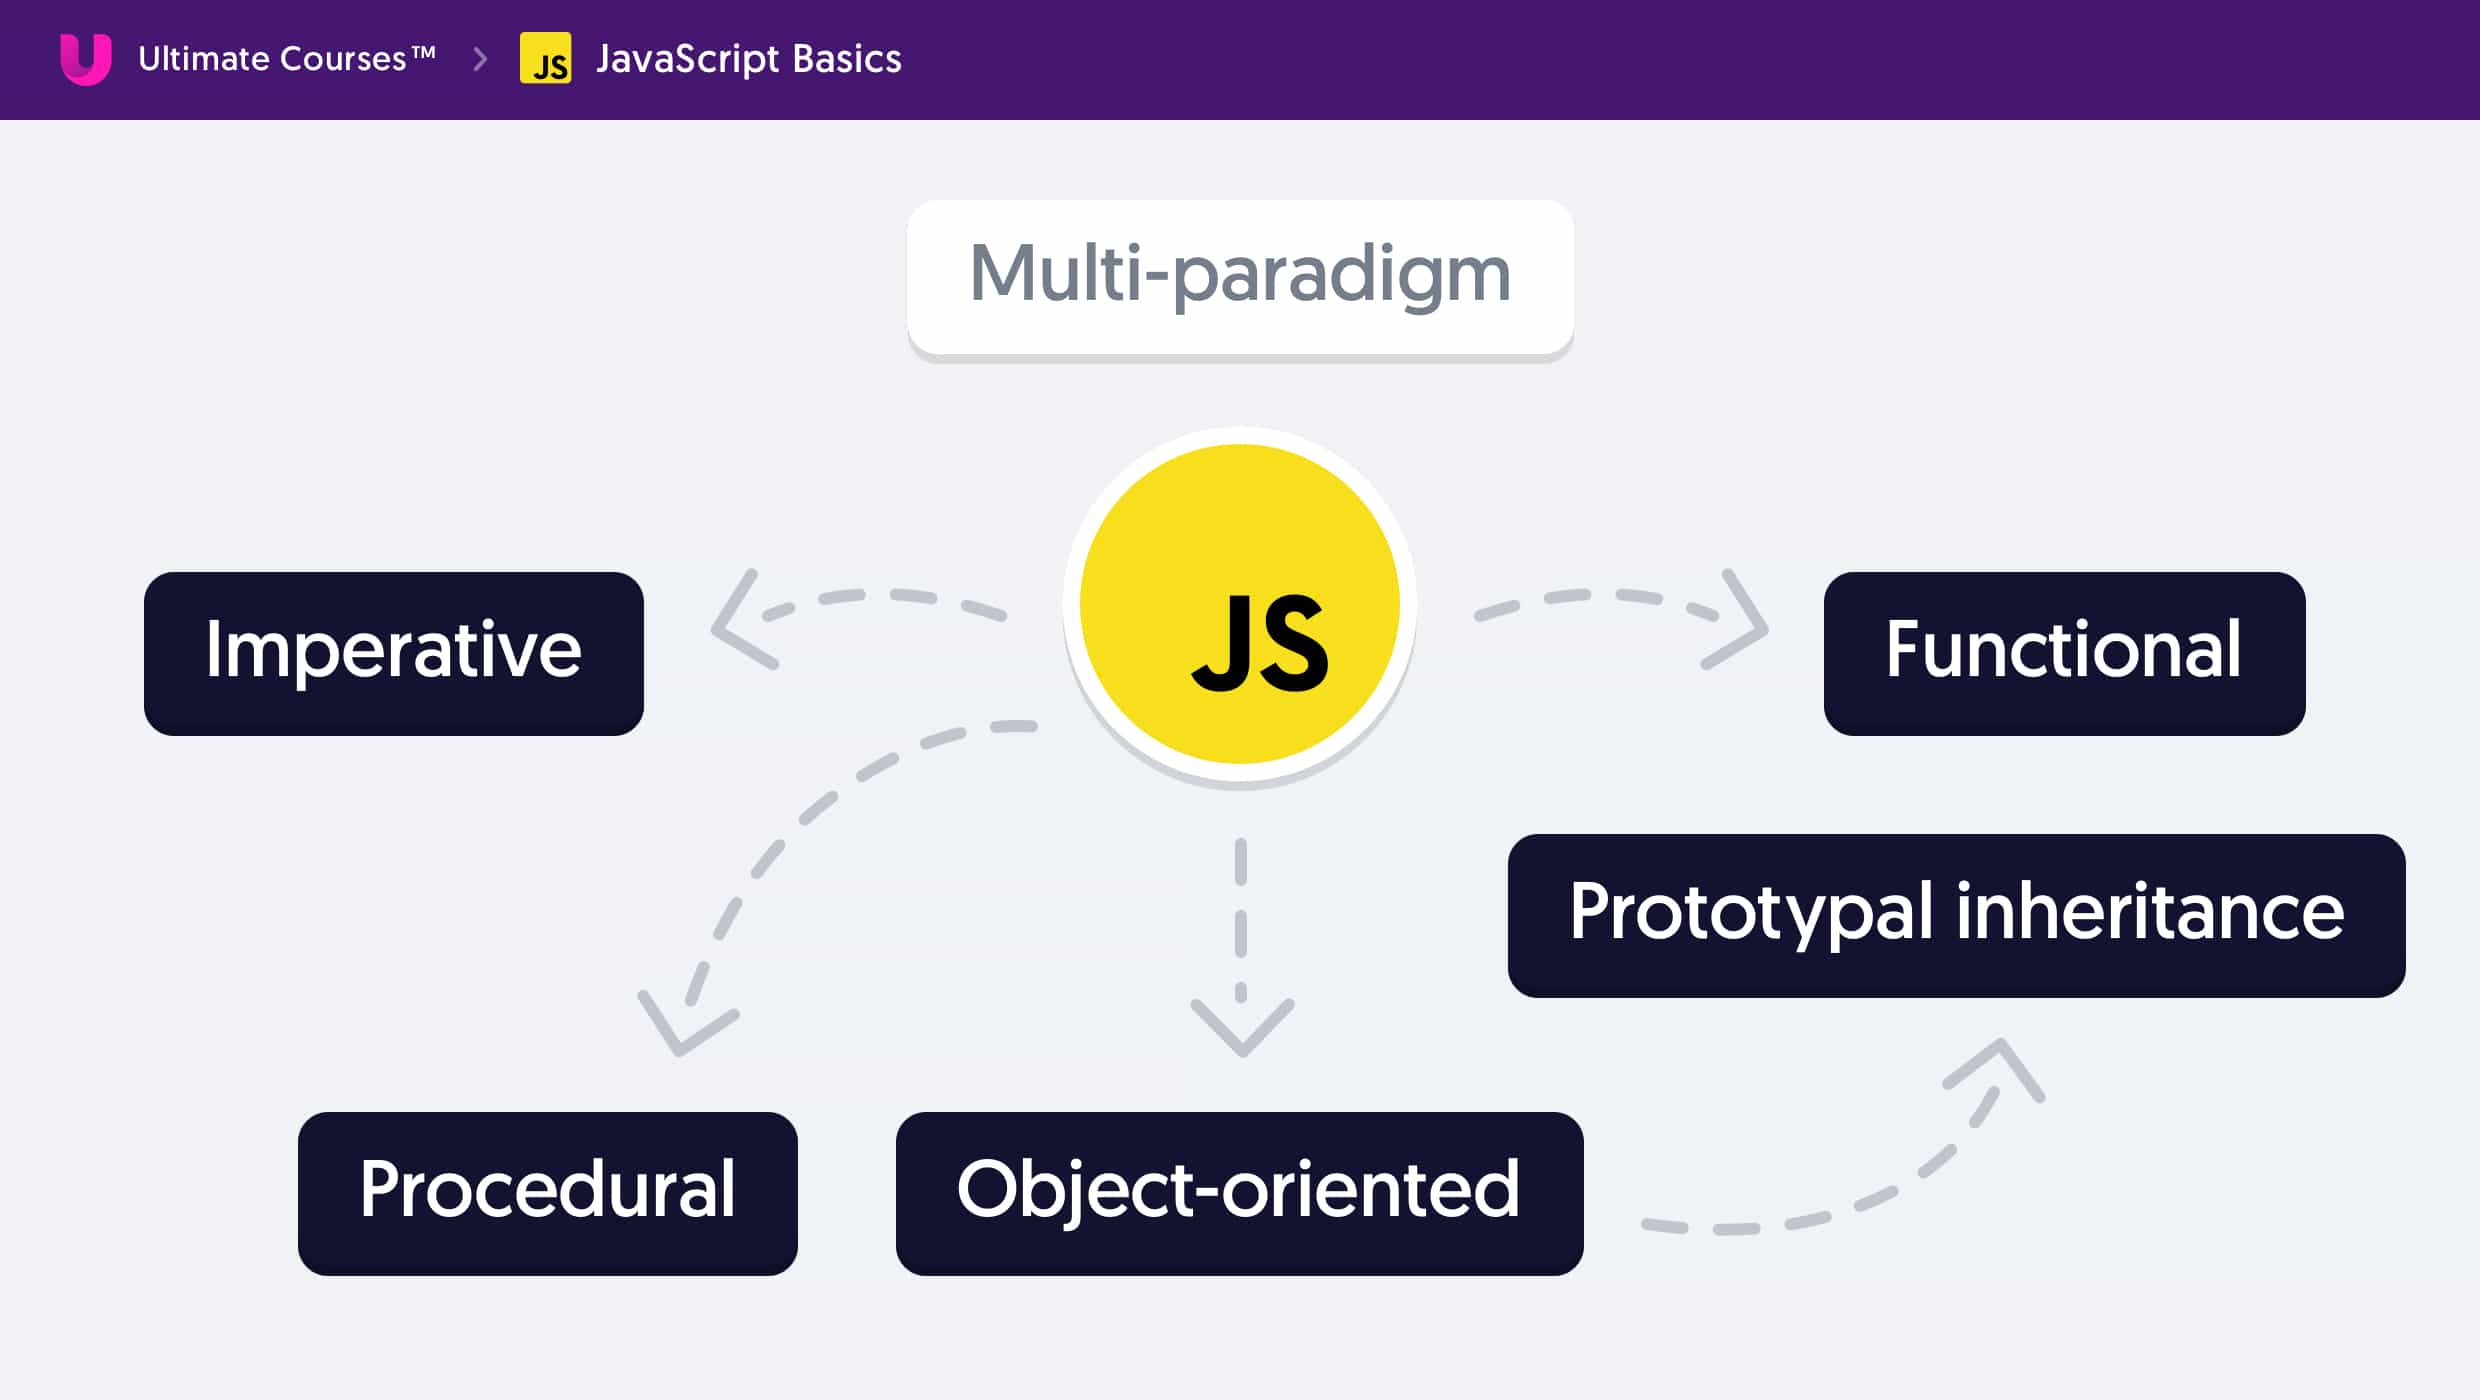 JavaScript as a multi-paradigm language, showing Imperative, Procedural, Object-oriented with Prototypal Inheritance and finally Functional